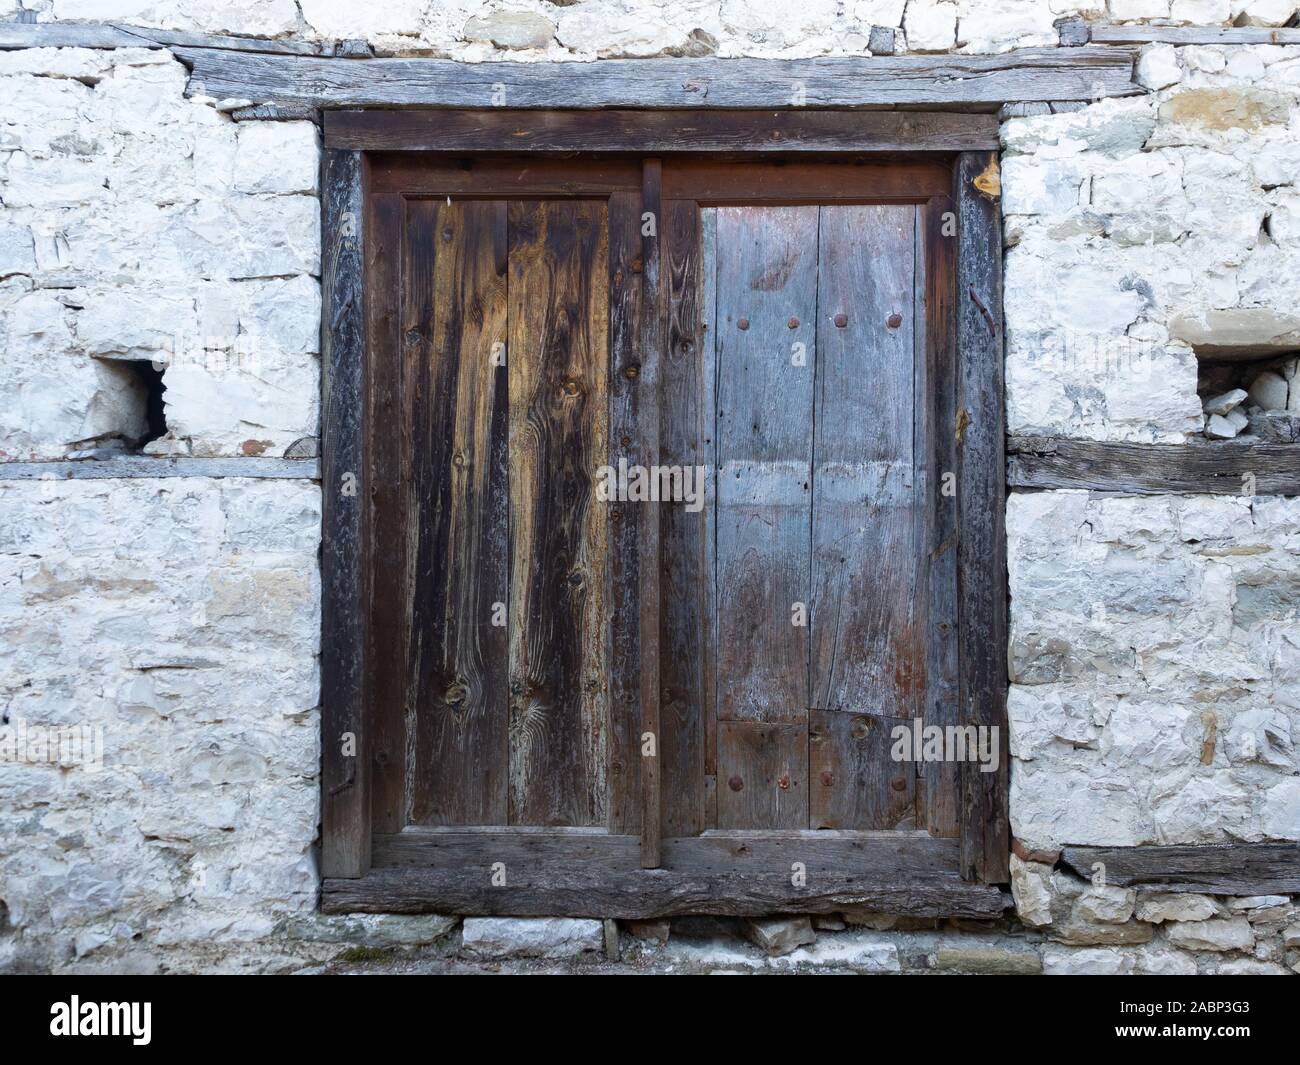 Weathered wooden door with wood beams between layers of stone in an old building. Stock Photo